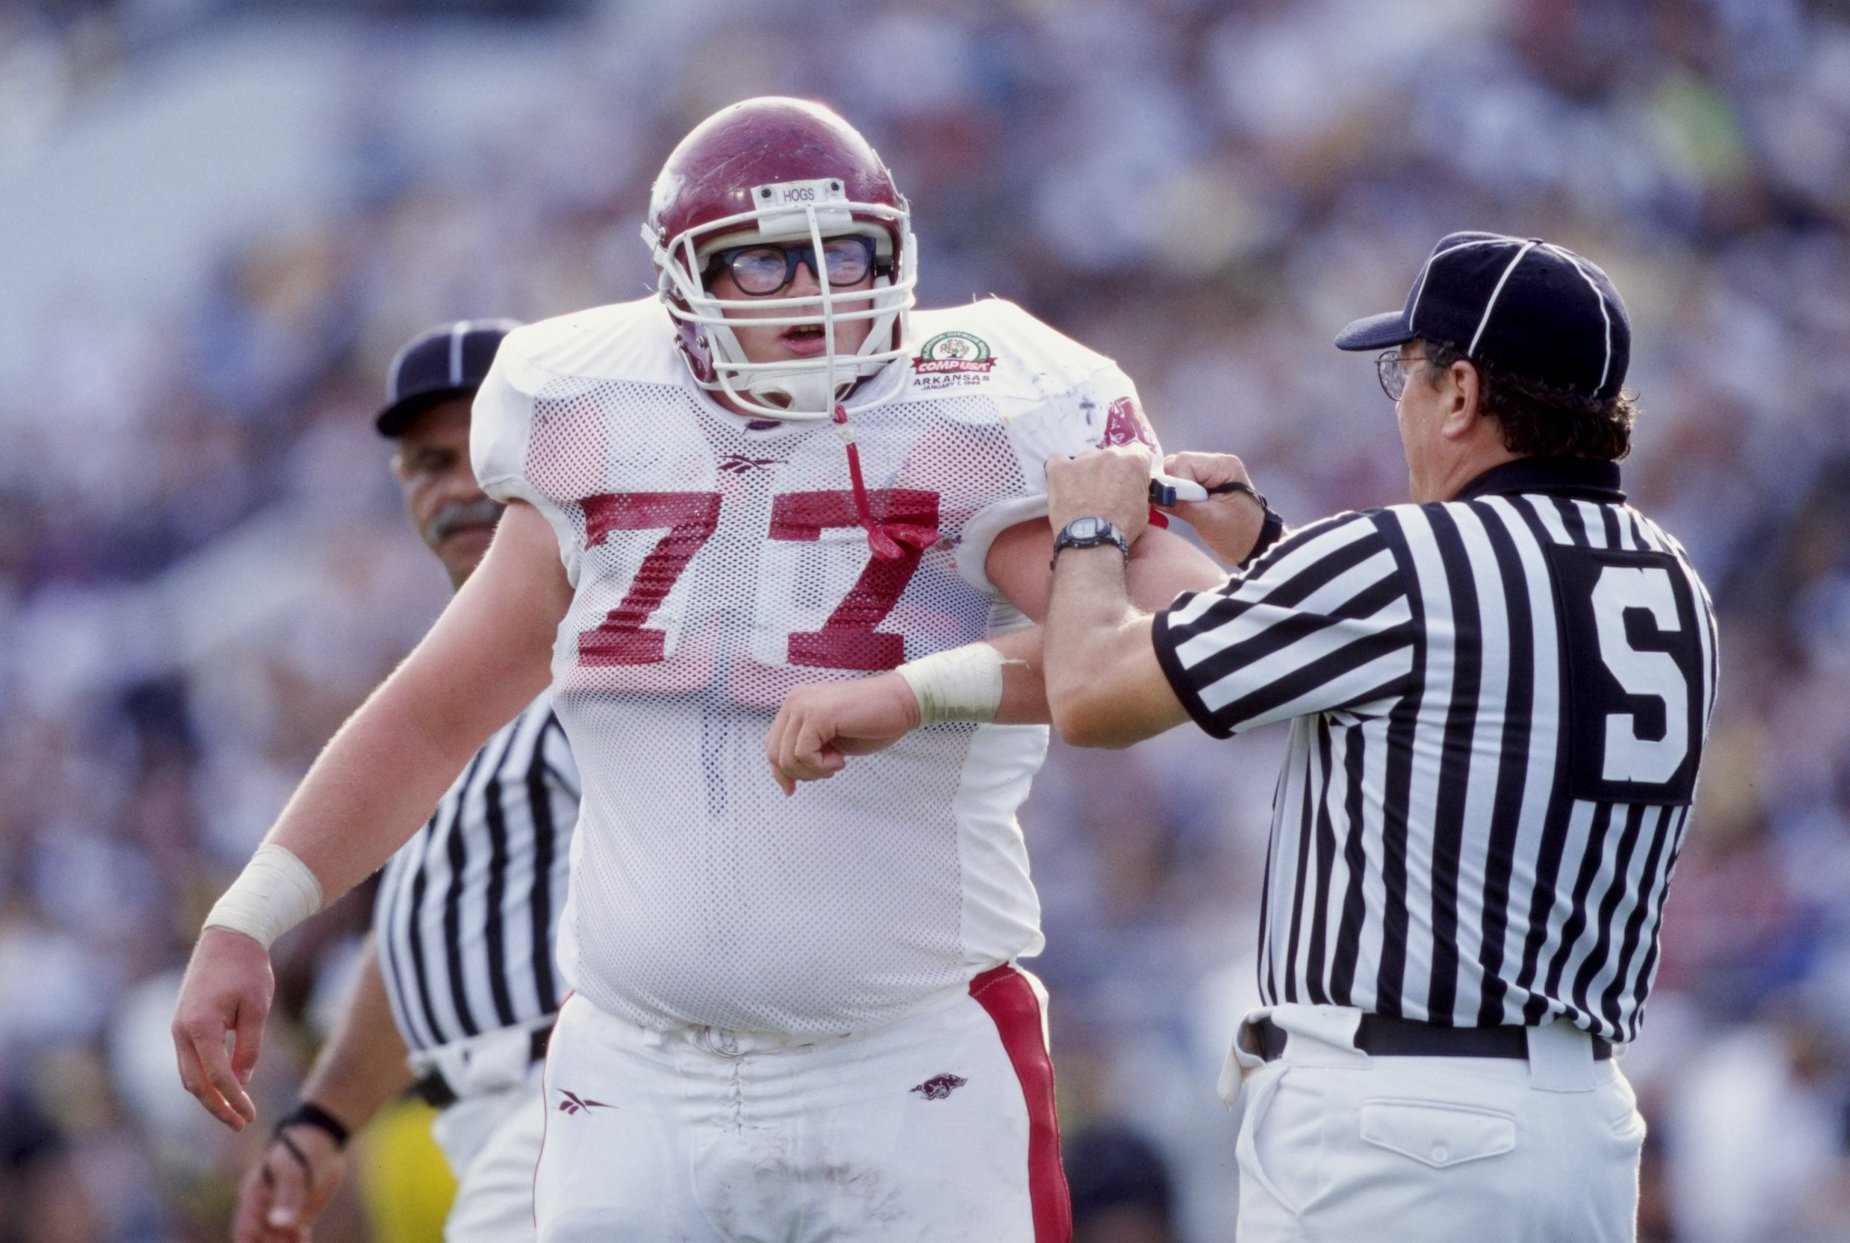 Brandon Burlsworth Rose From Walk-On To All-American but Tragically